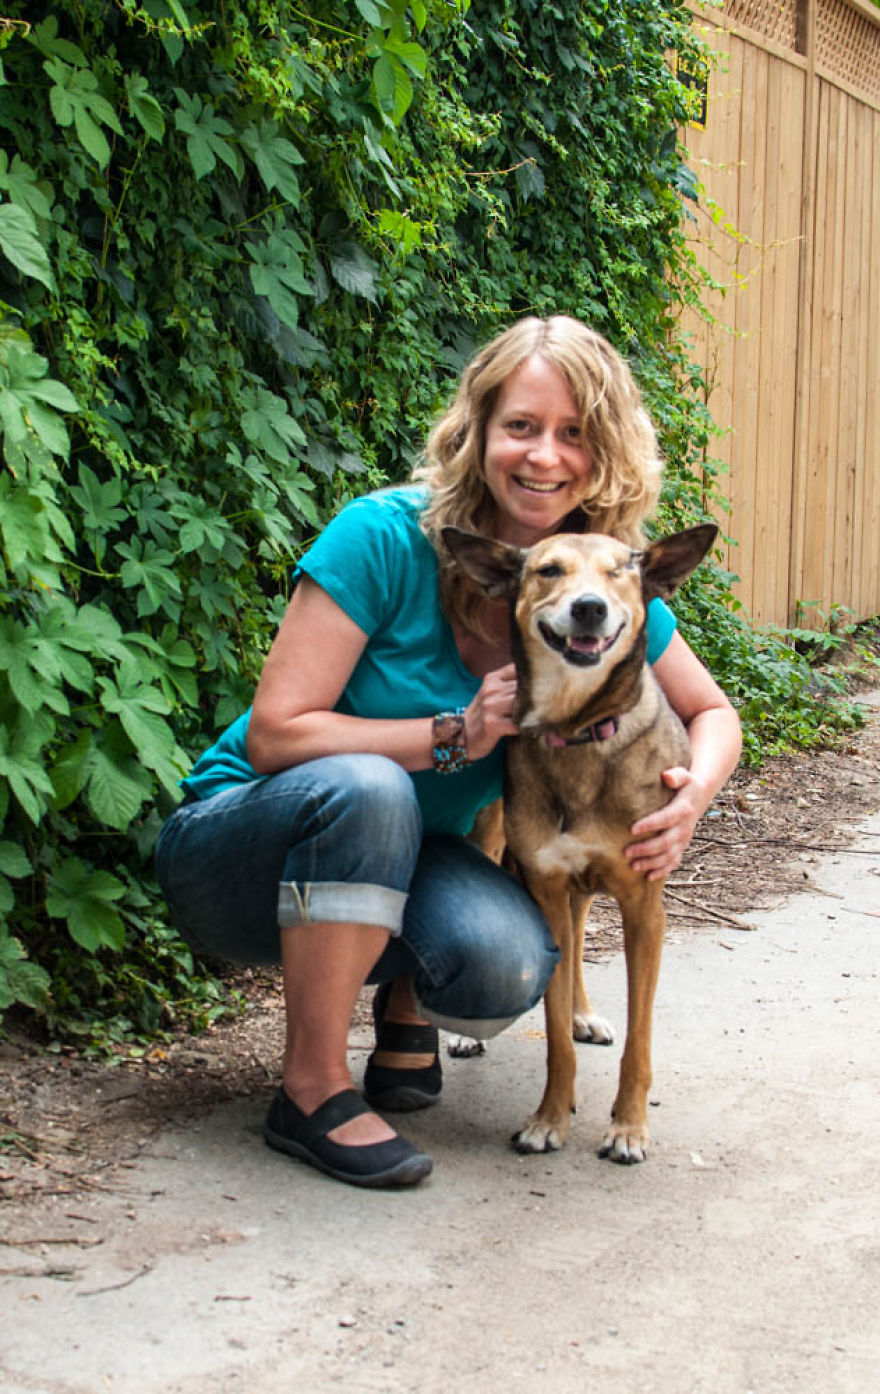 I Photographed Over 200 Families With Rescued Dogs To Inspire Others To Adopt